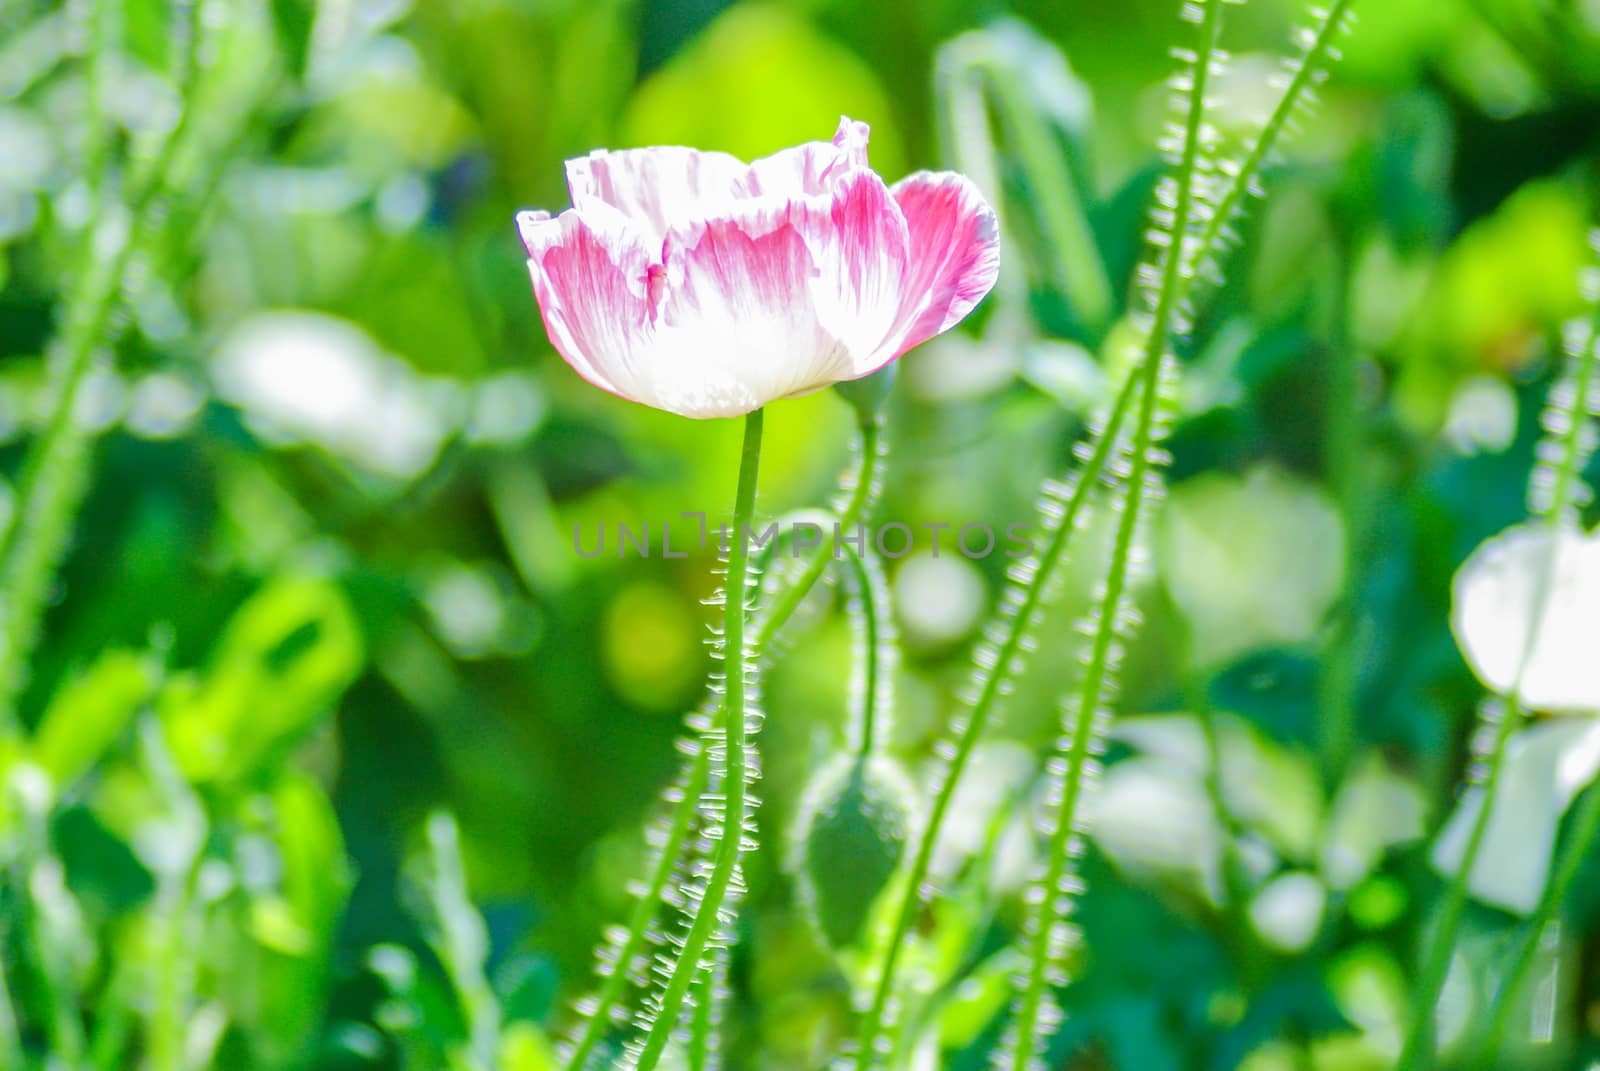 Red and pink poppy flowers in a field, red papaverRed and pink p by yuiyuize